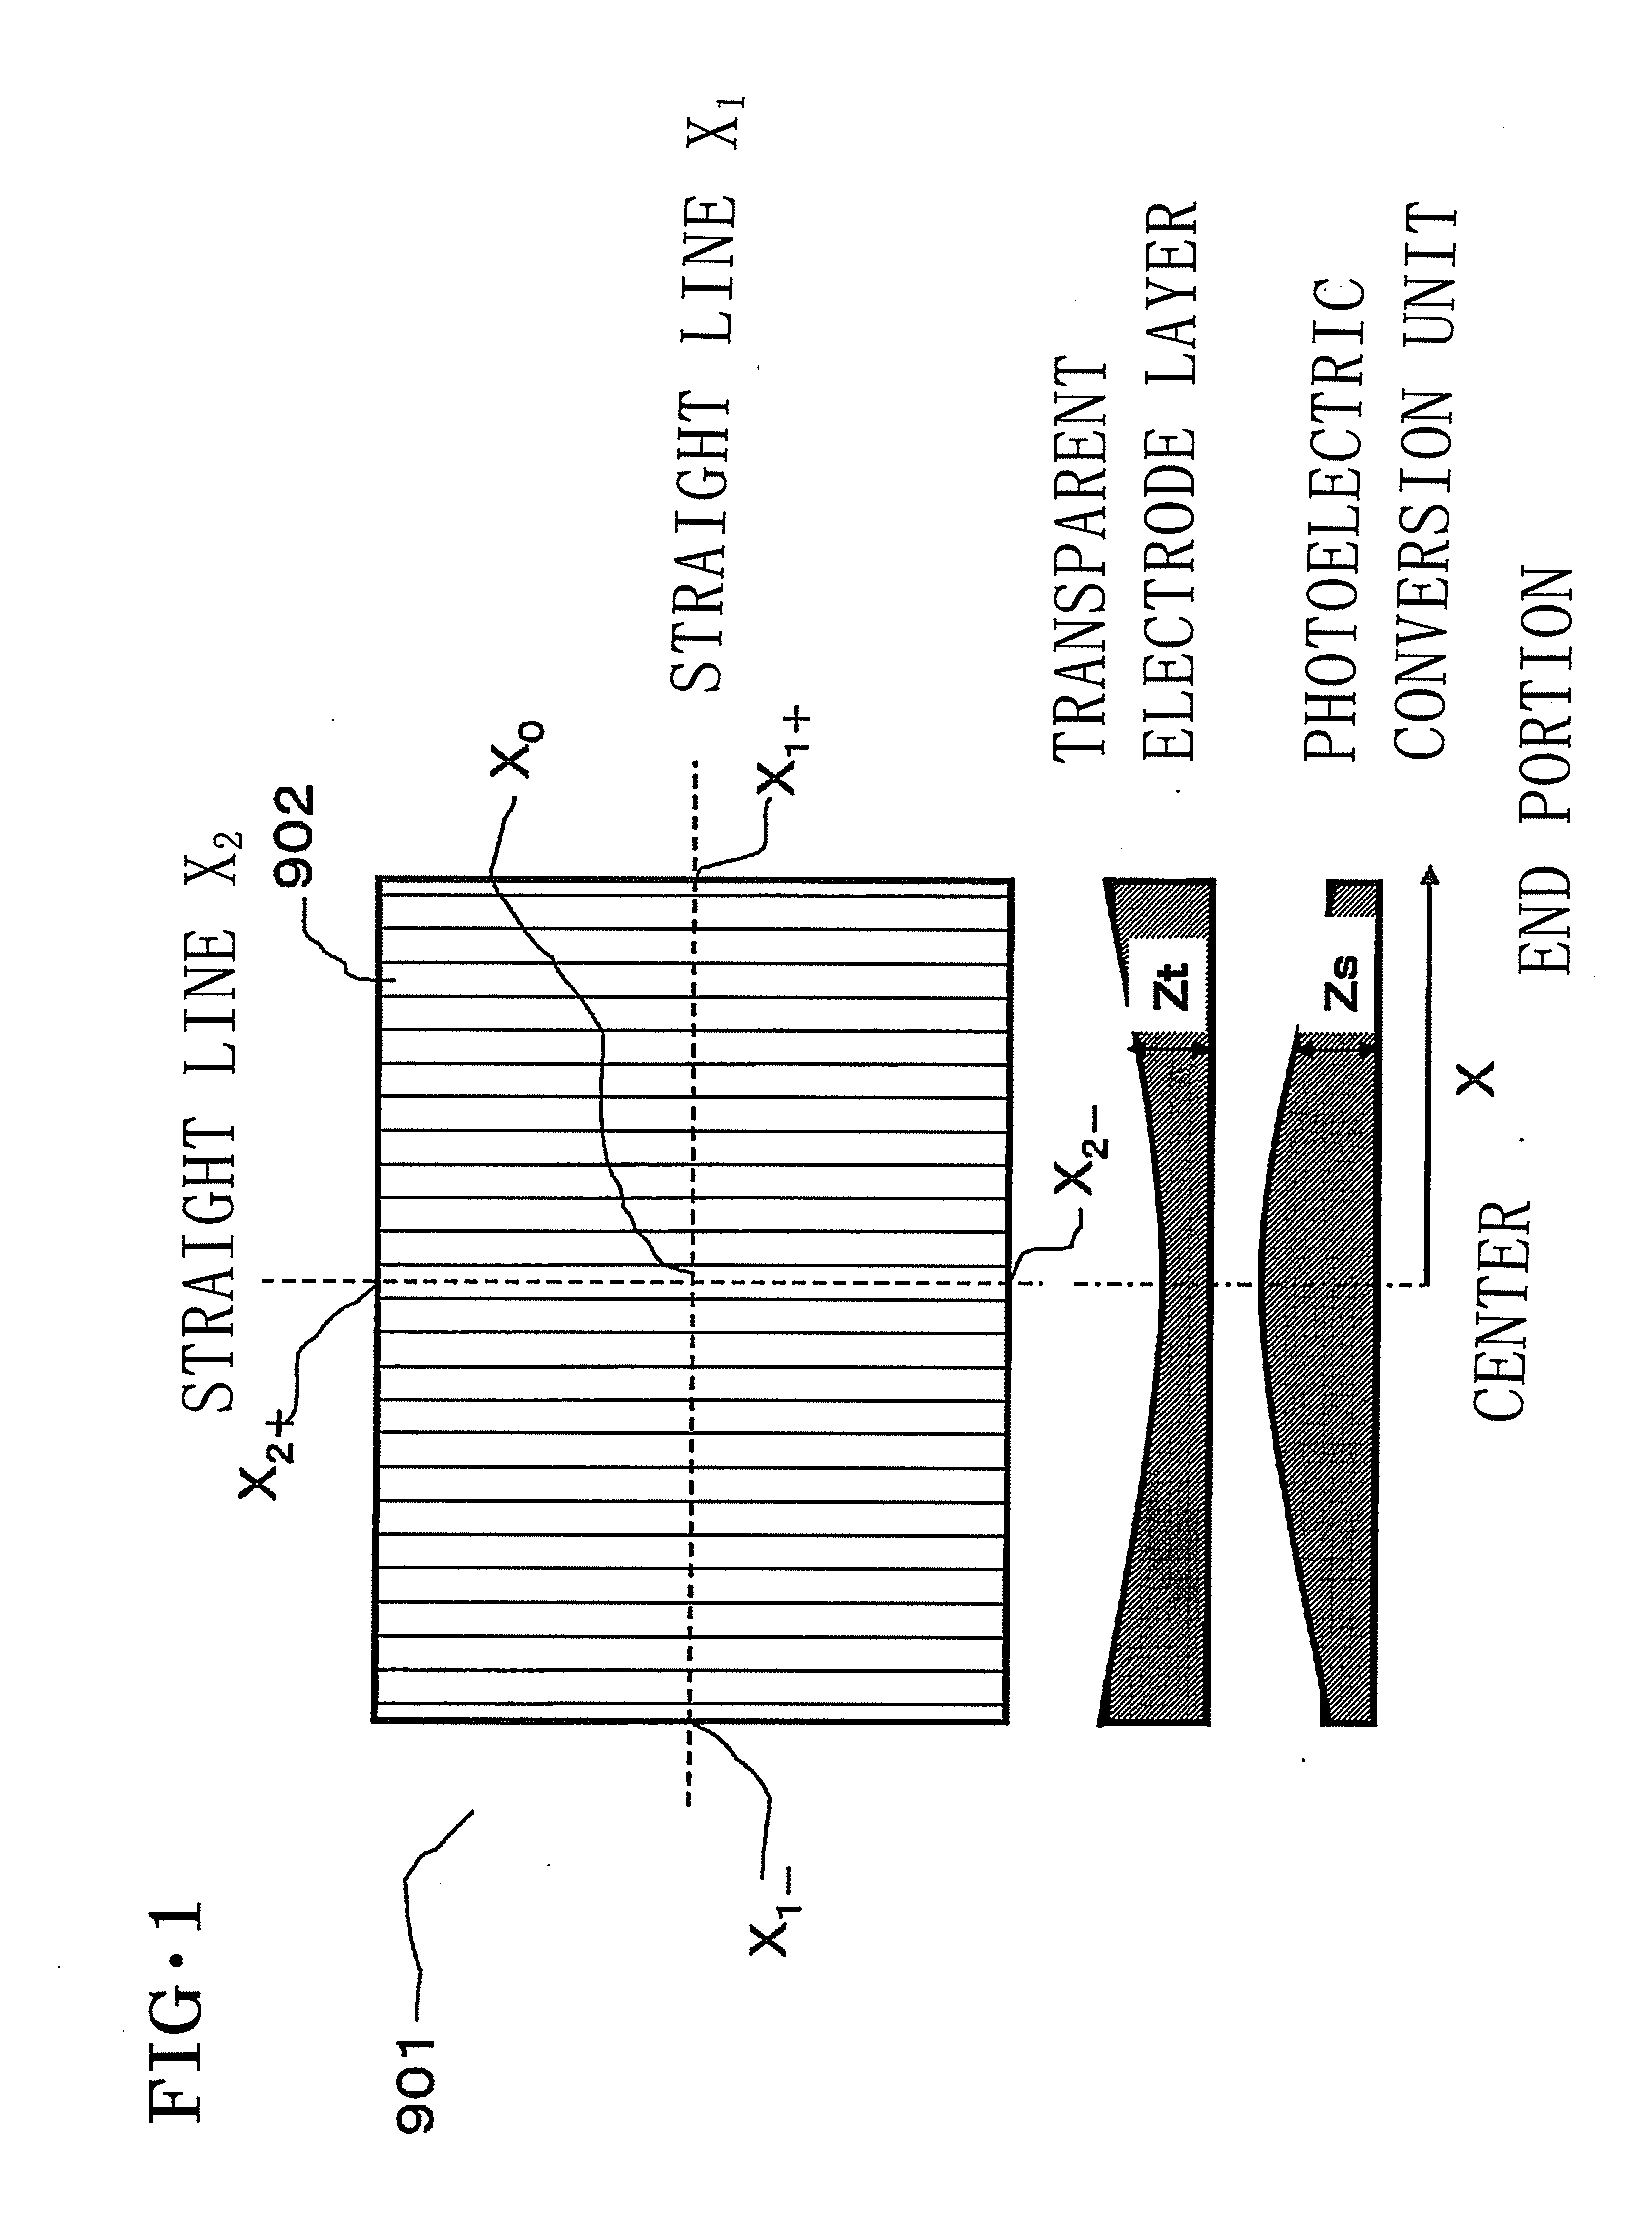 Thin film photoelectric conversion device and method for manufacturing the same